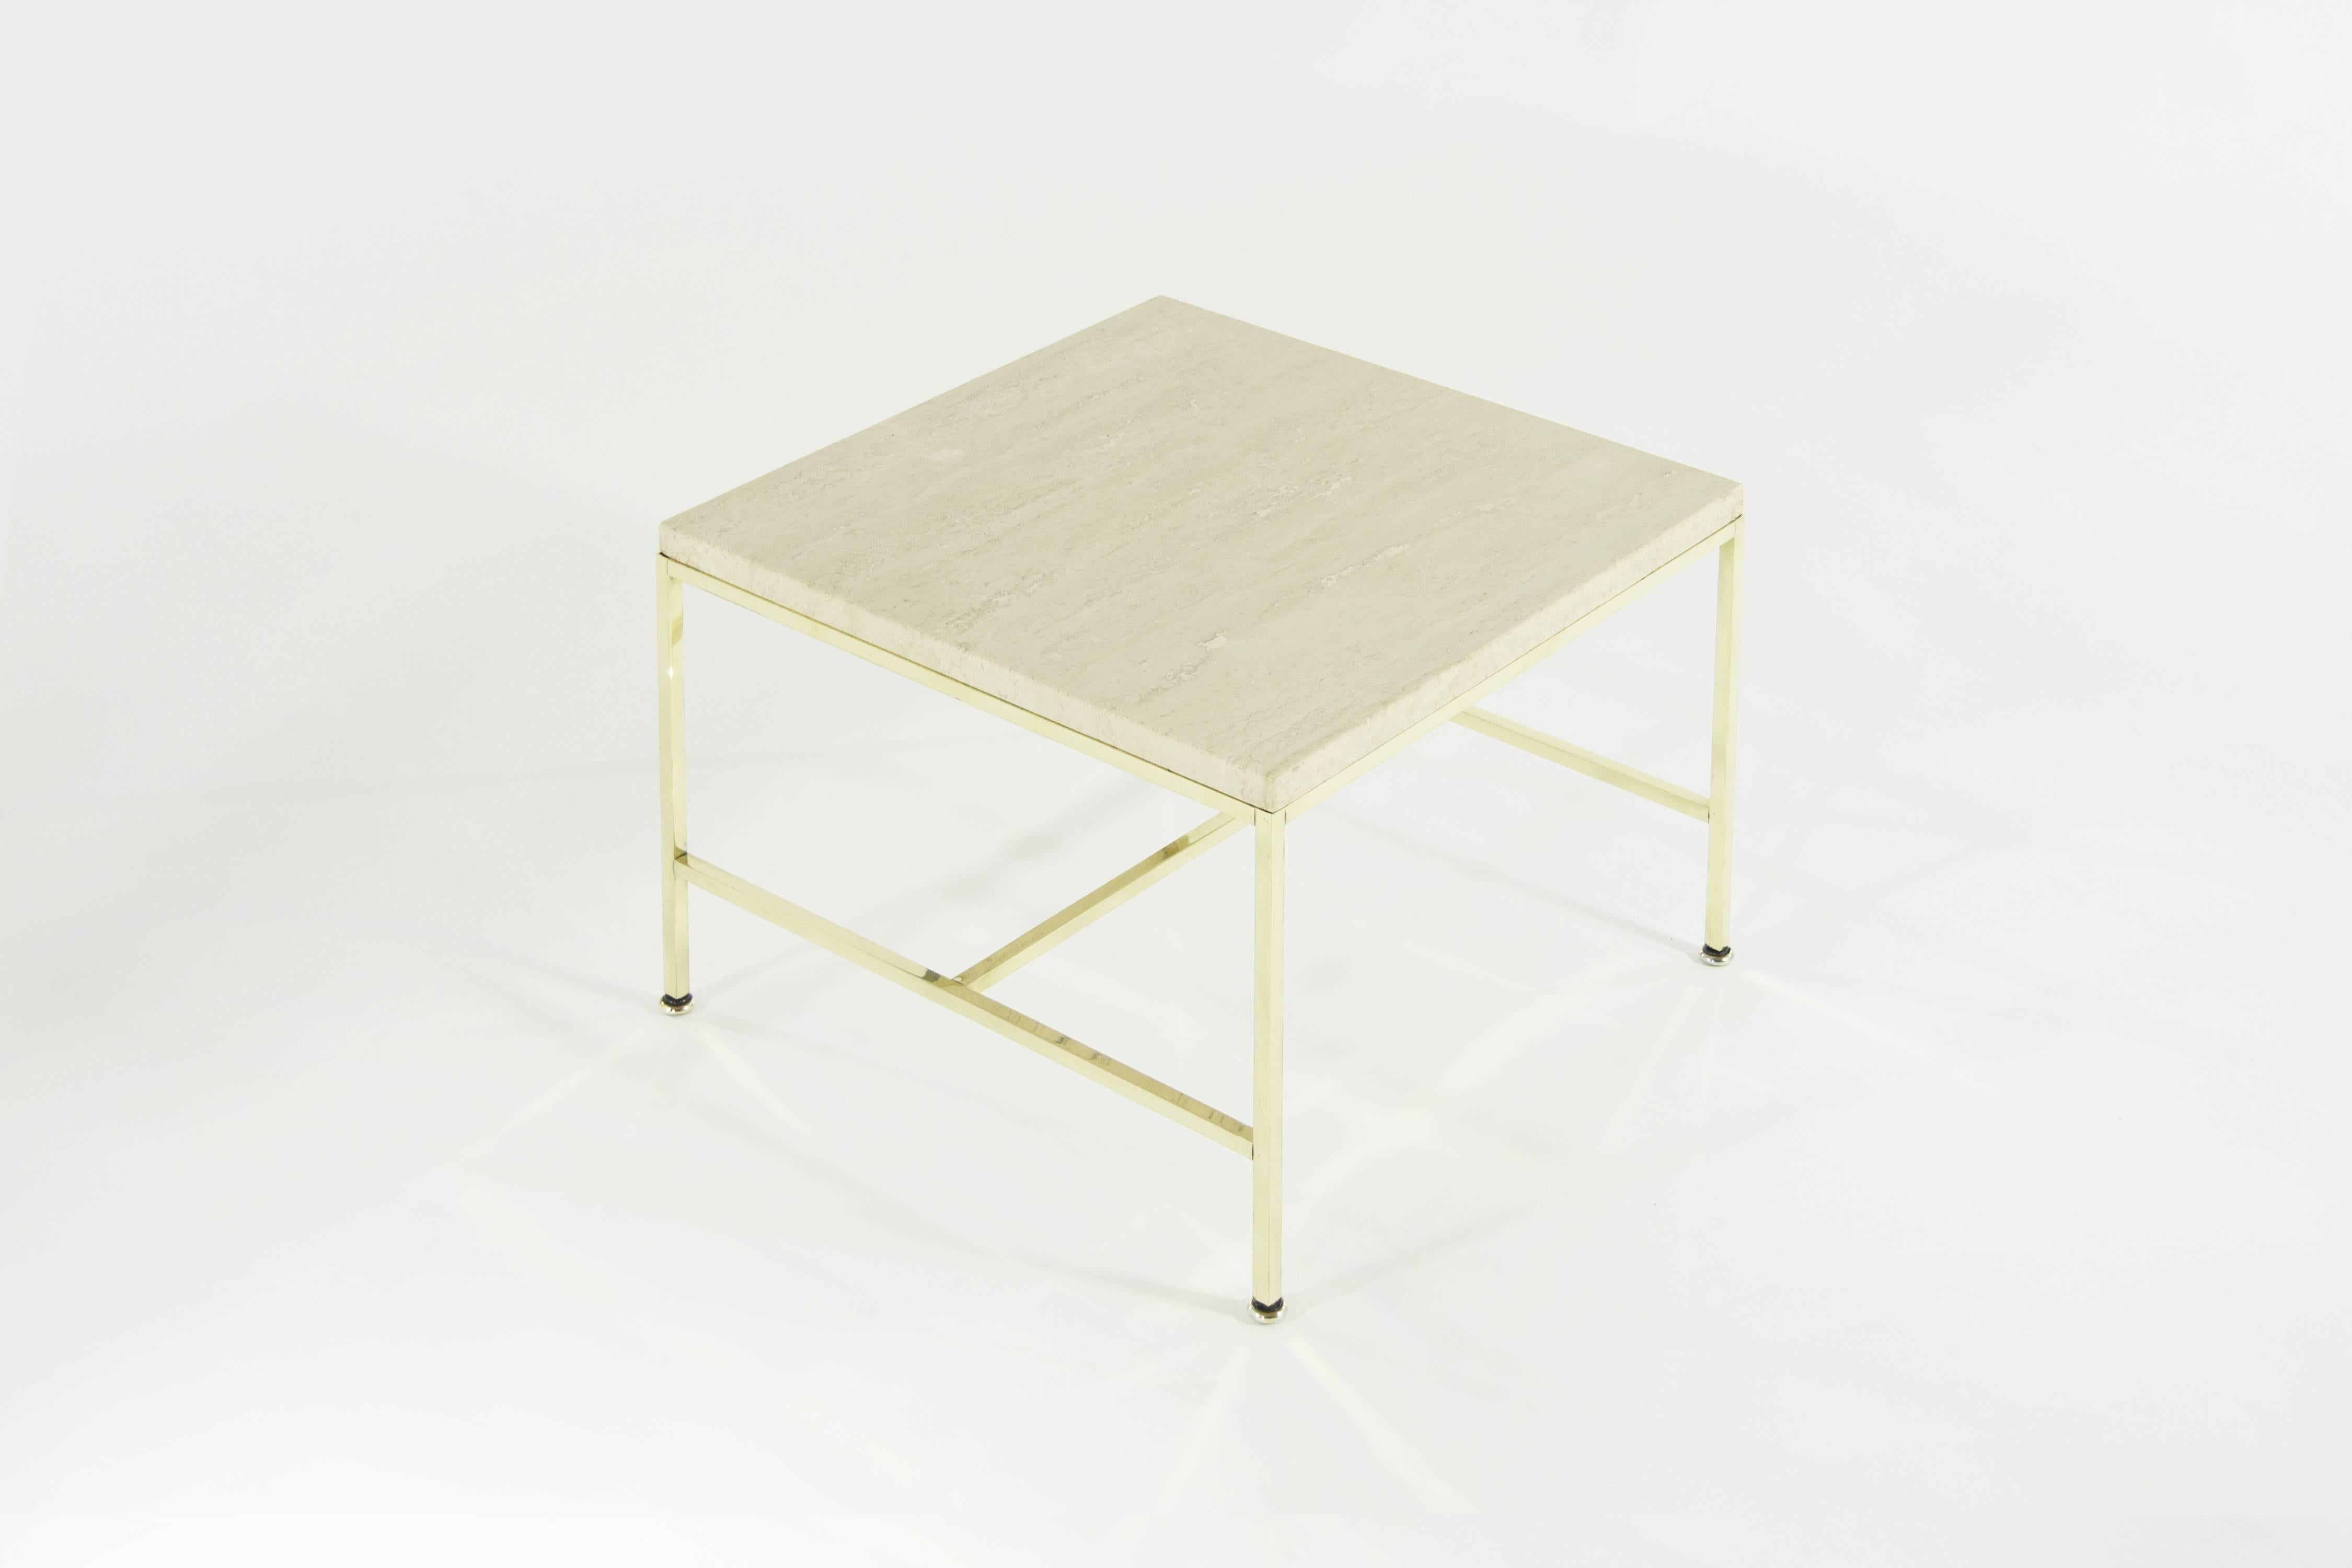 Classic brass side table by Paul McCobb, brass and travertine top newly polished.